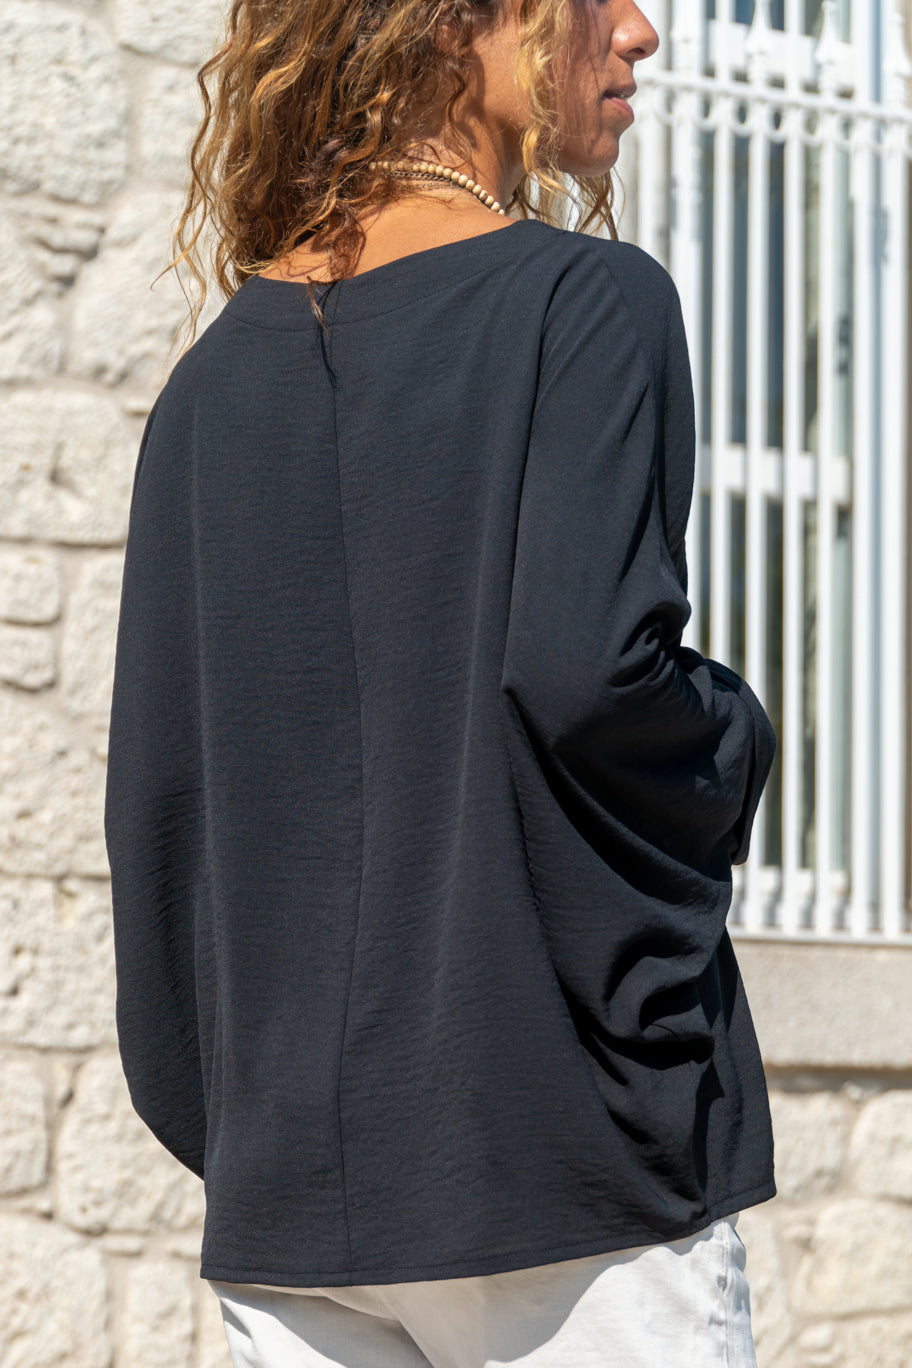 Textured Black Women's Blouse - Wide Round Neck, Long Wide Sleeves & Loose Fit for Chic Comfort (Polyester, Cotton Fabric)